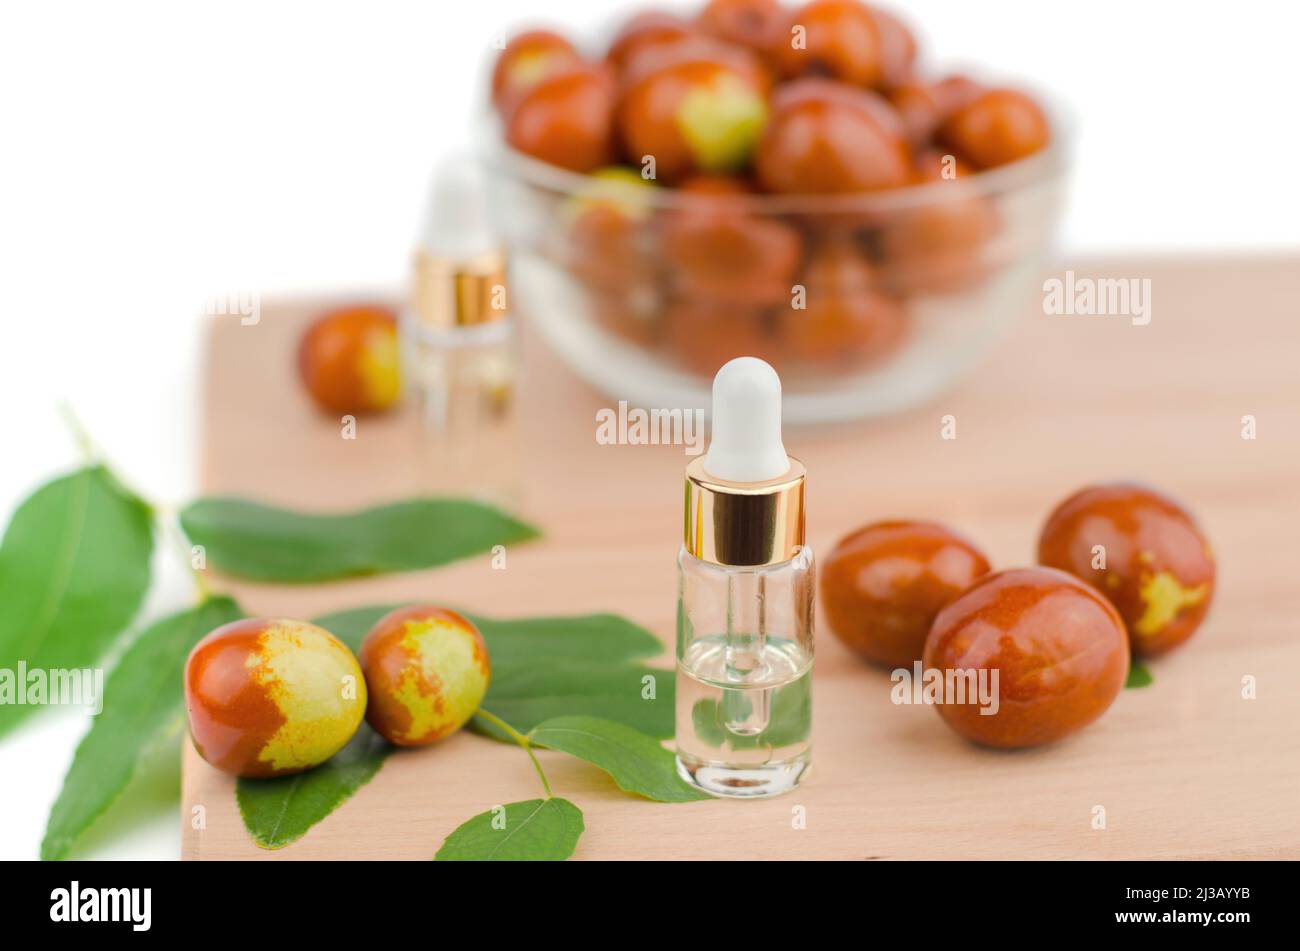 Jojoba oil in a transparent bottle with a dropper and fresh jojoba fruit on a wooden table. Chinese date fruit and oil Stock Photo